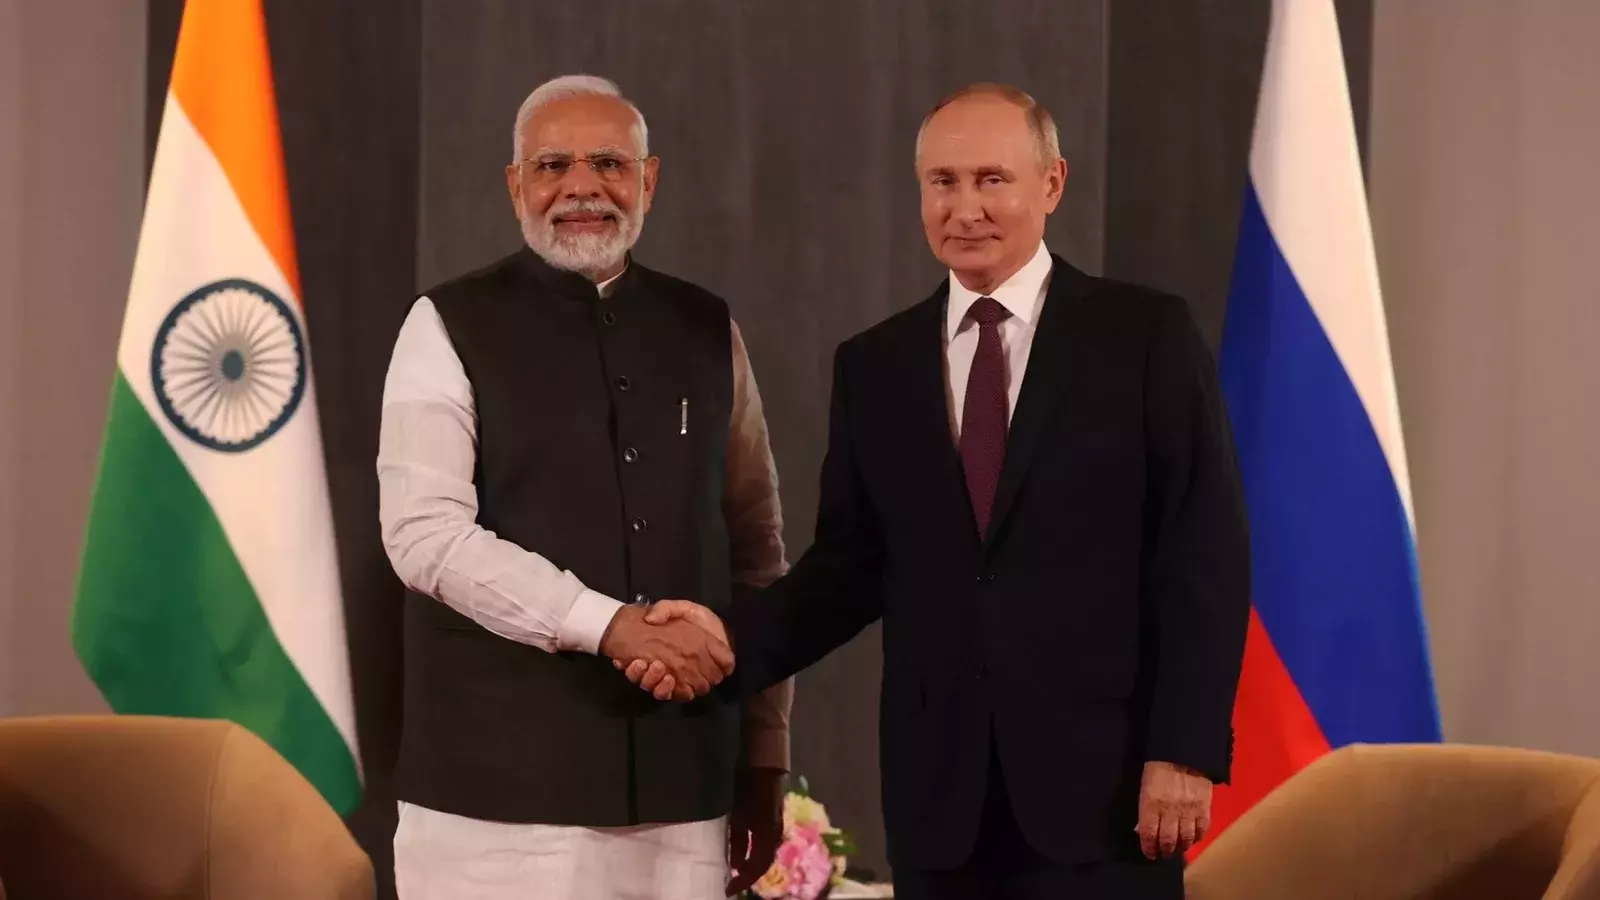 Indian citizens are talented and purposeful, says Russian President